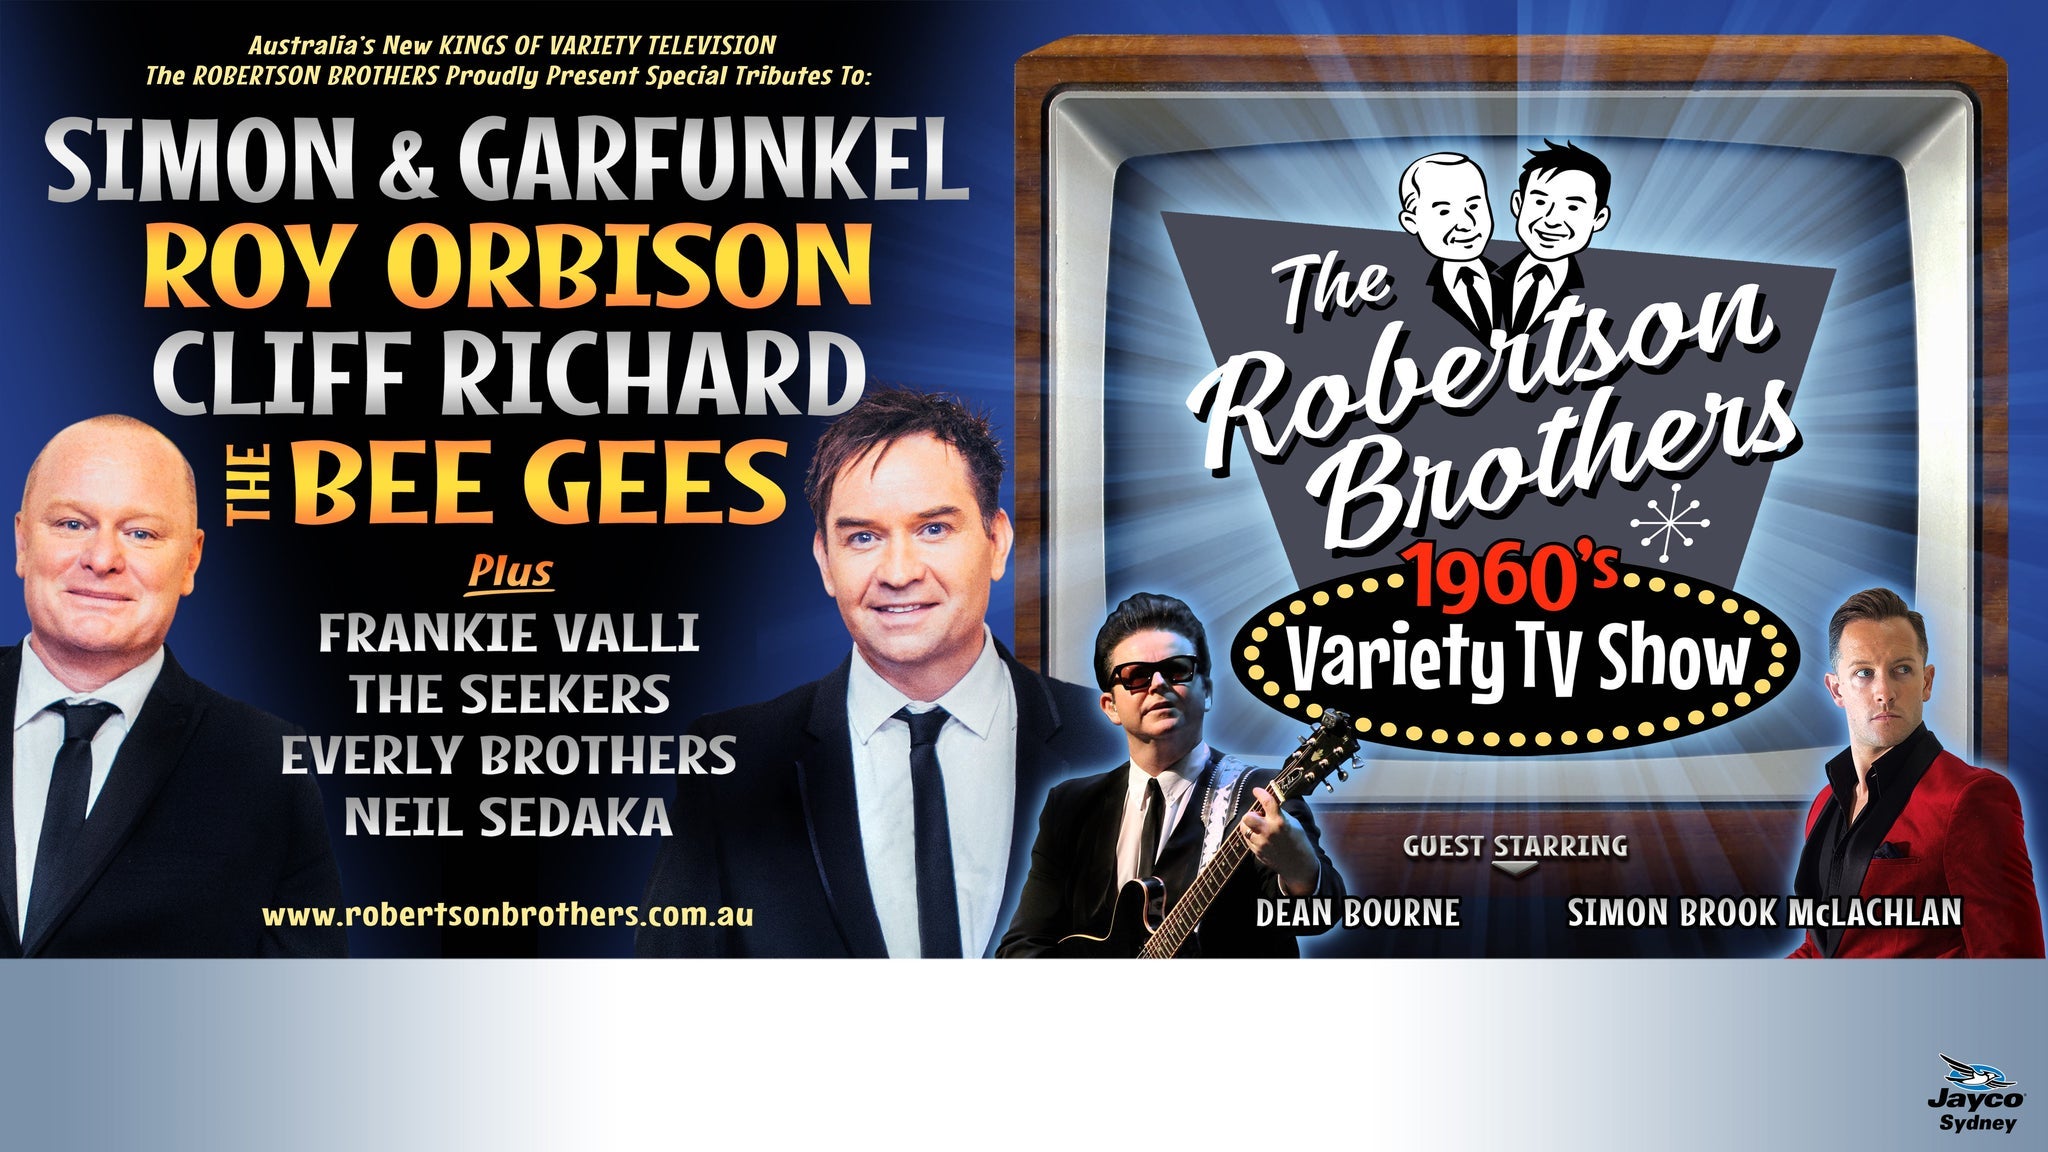 Image used with permission from Ticketmaster | Robertson Brothers 1960s Variety TV Show tickets